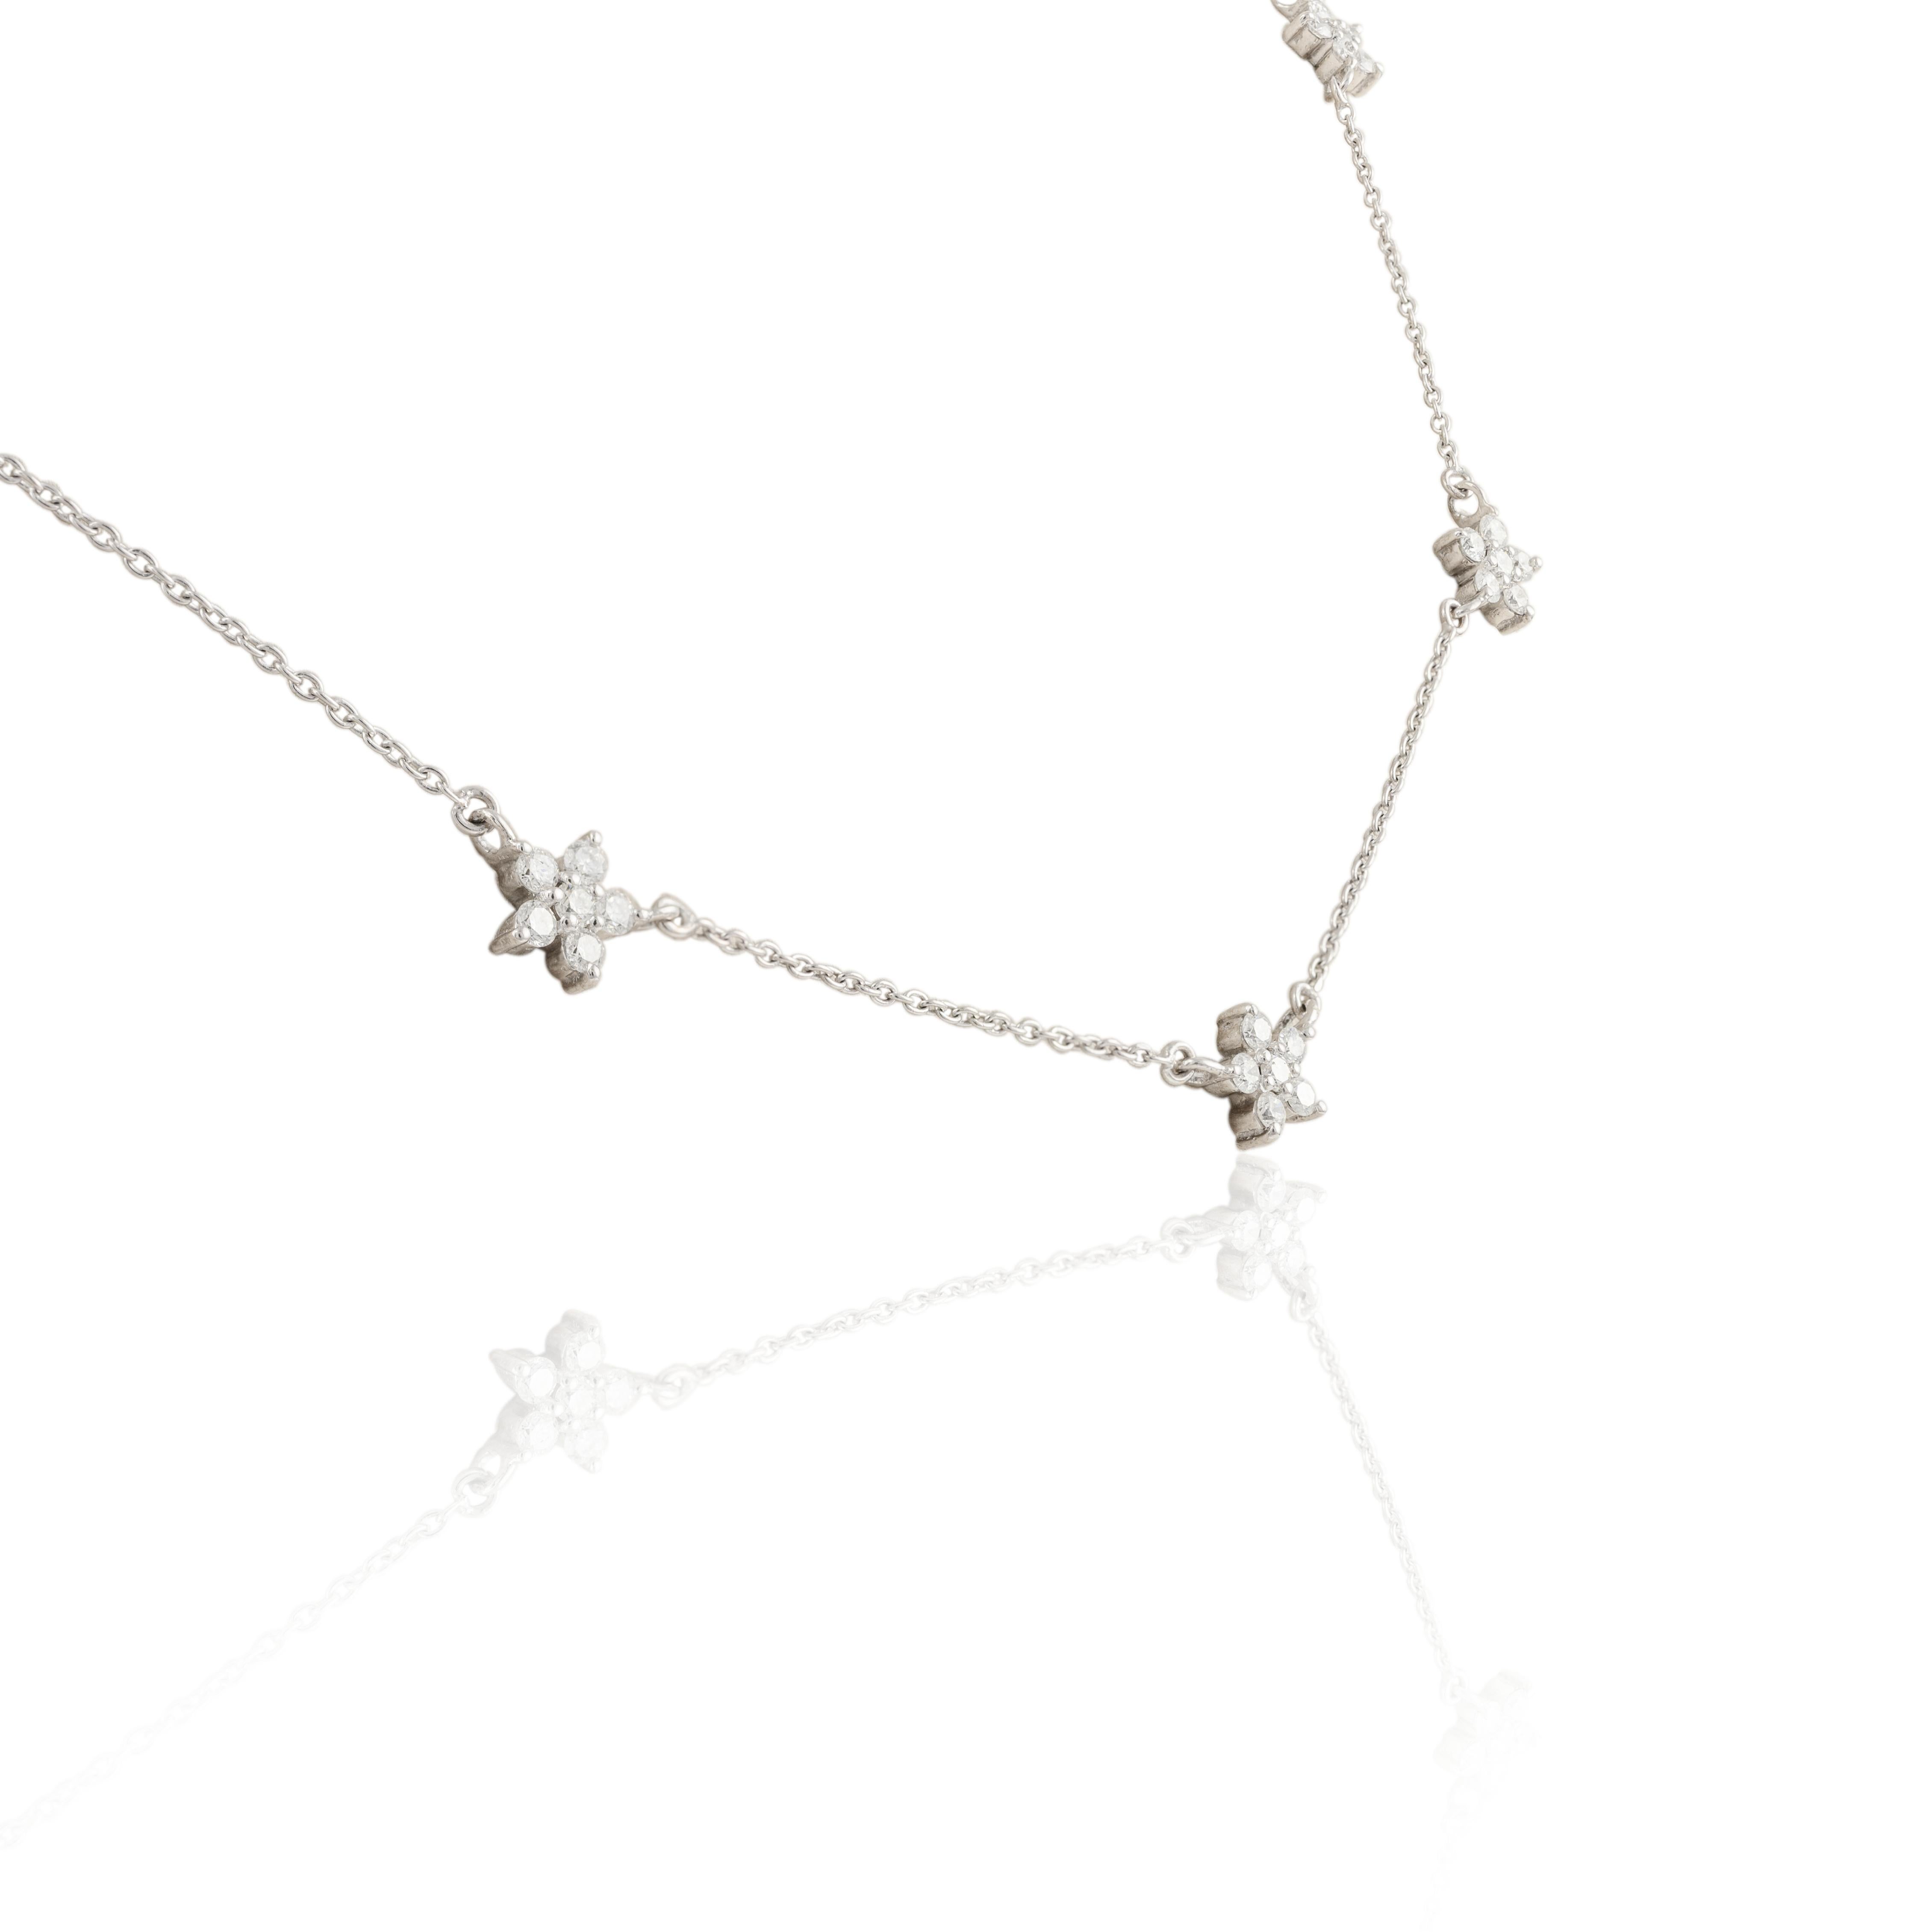 Taille ronde 14k Solid White Gold Star Diamond Chain Necklace Gift For Her en vente